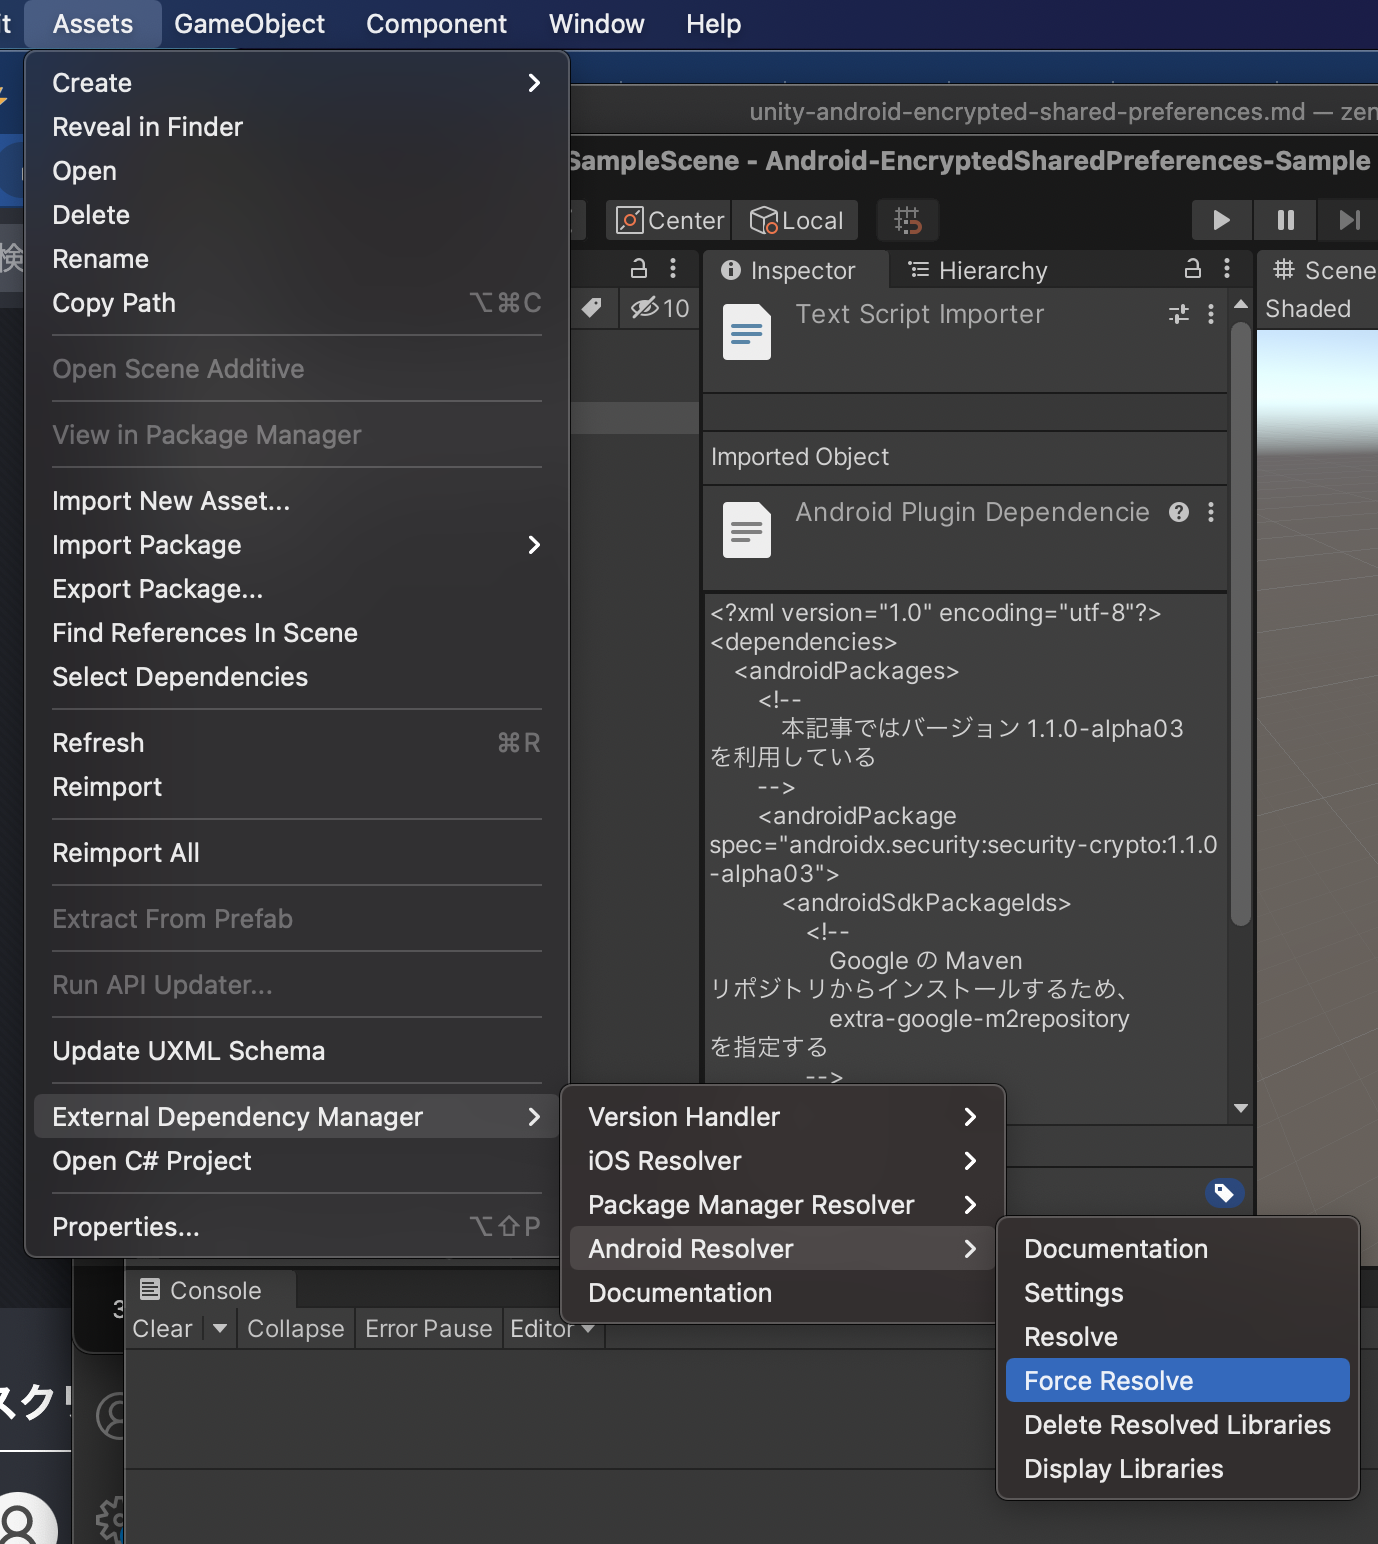 1. Unity メニューから <code>Assets -> External Dependency Manager -> Android Resolver -> Force Resolve</code> を選択する